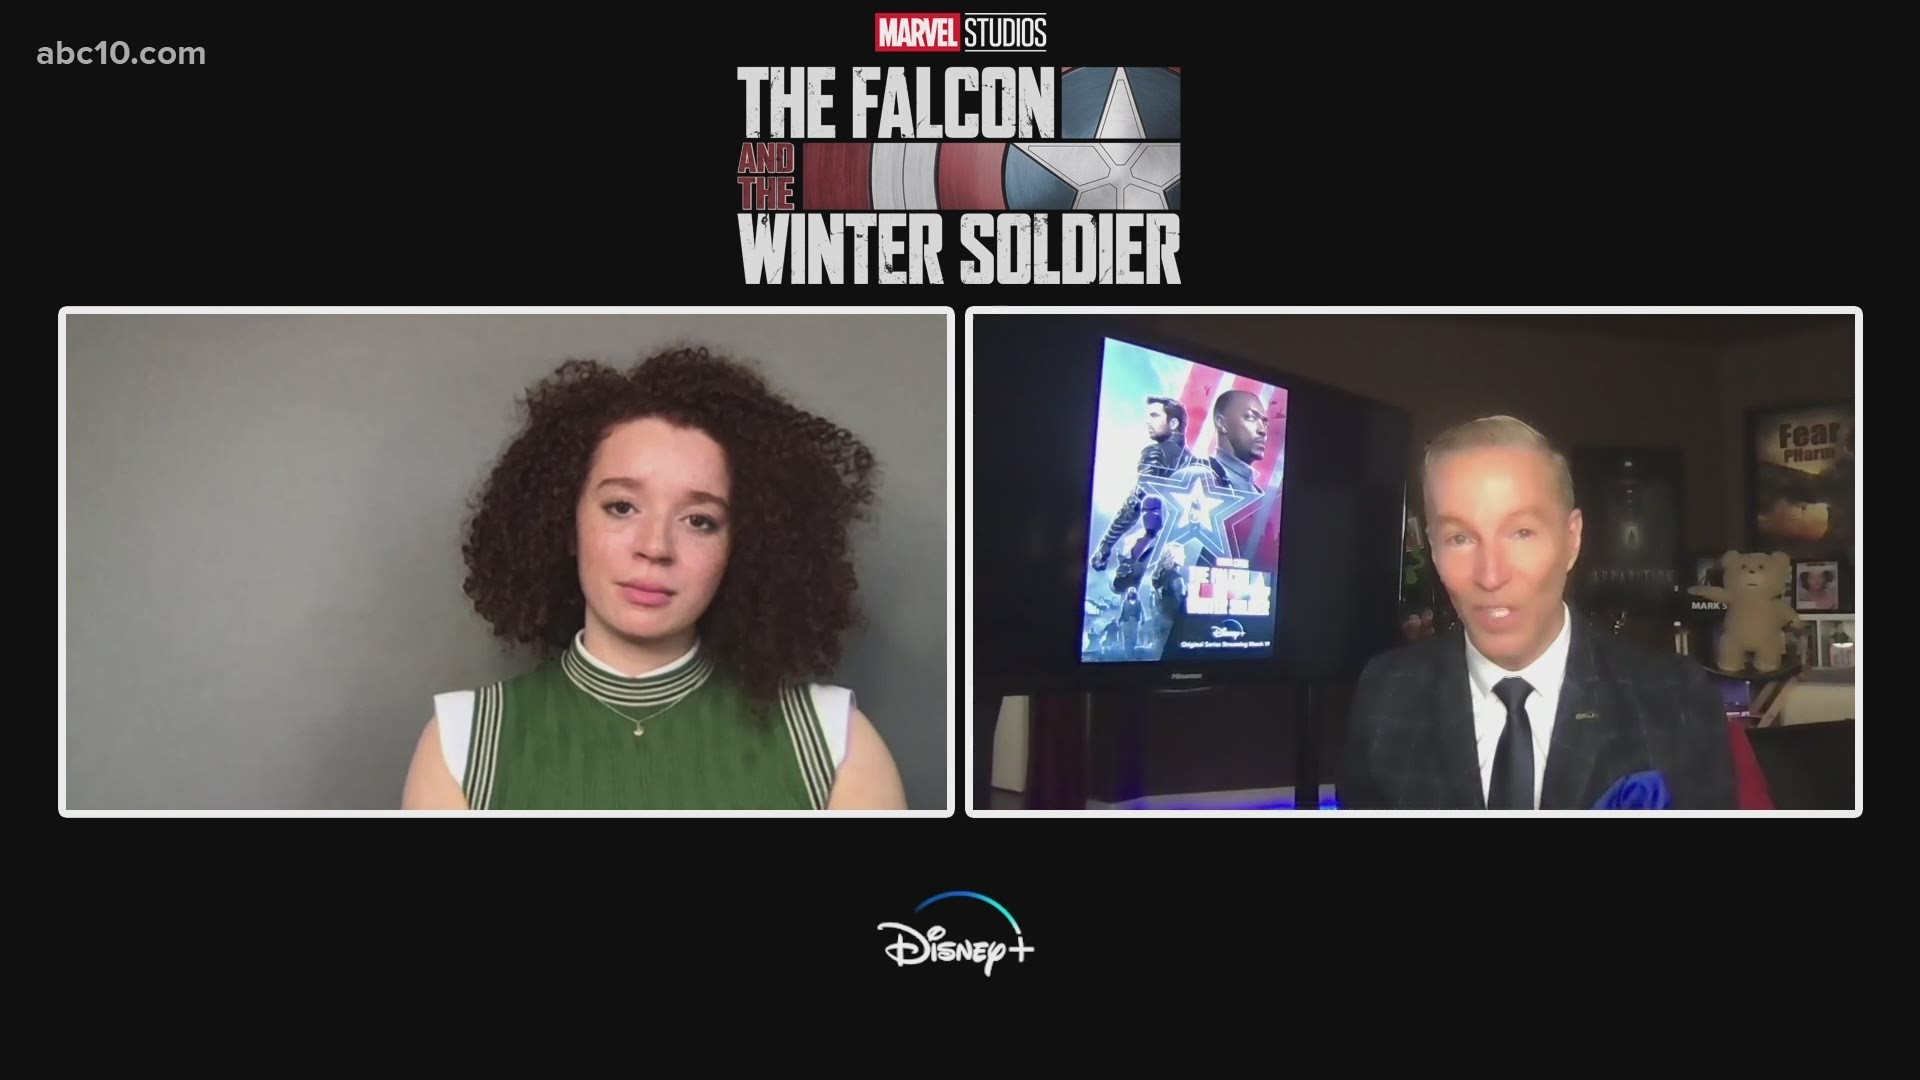 Erin Kellyman, who plays Karli in Marvel's The Falcon and Winter Soldier talks to Mark about the final three episodes and the cast's diversity.